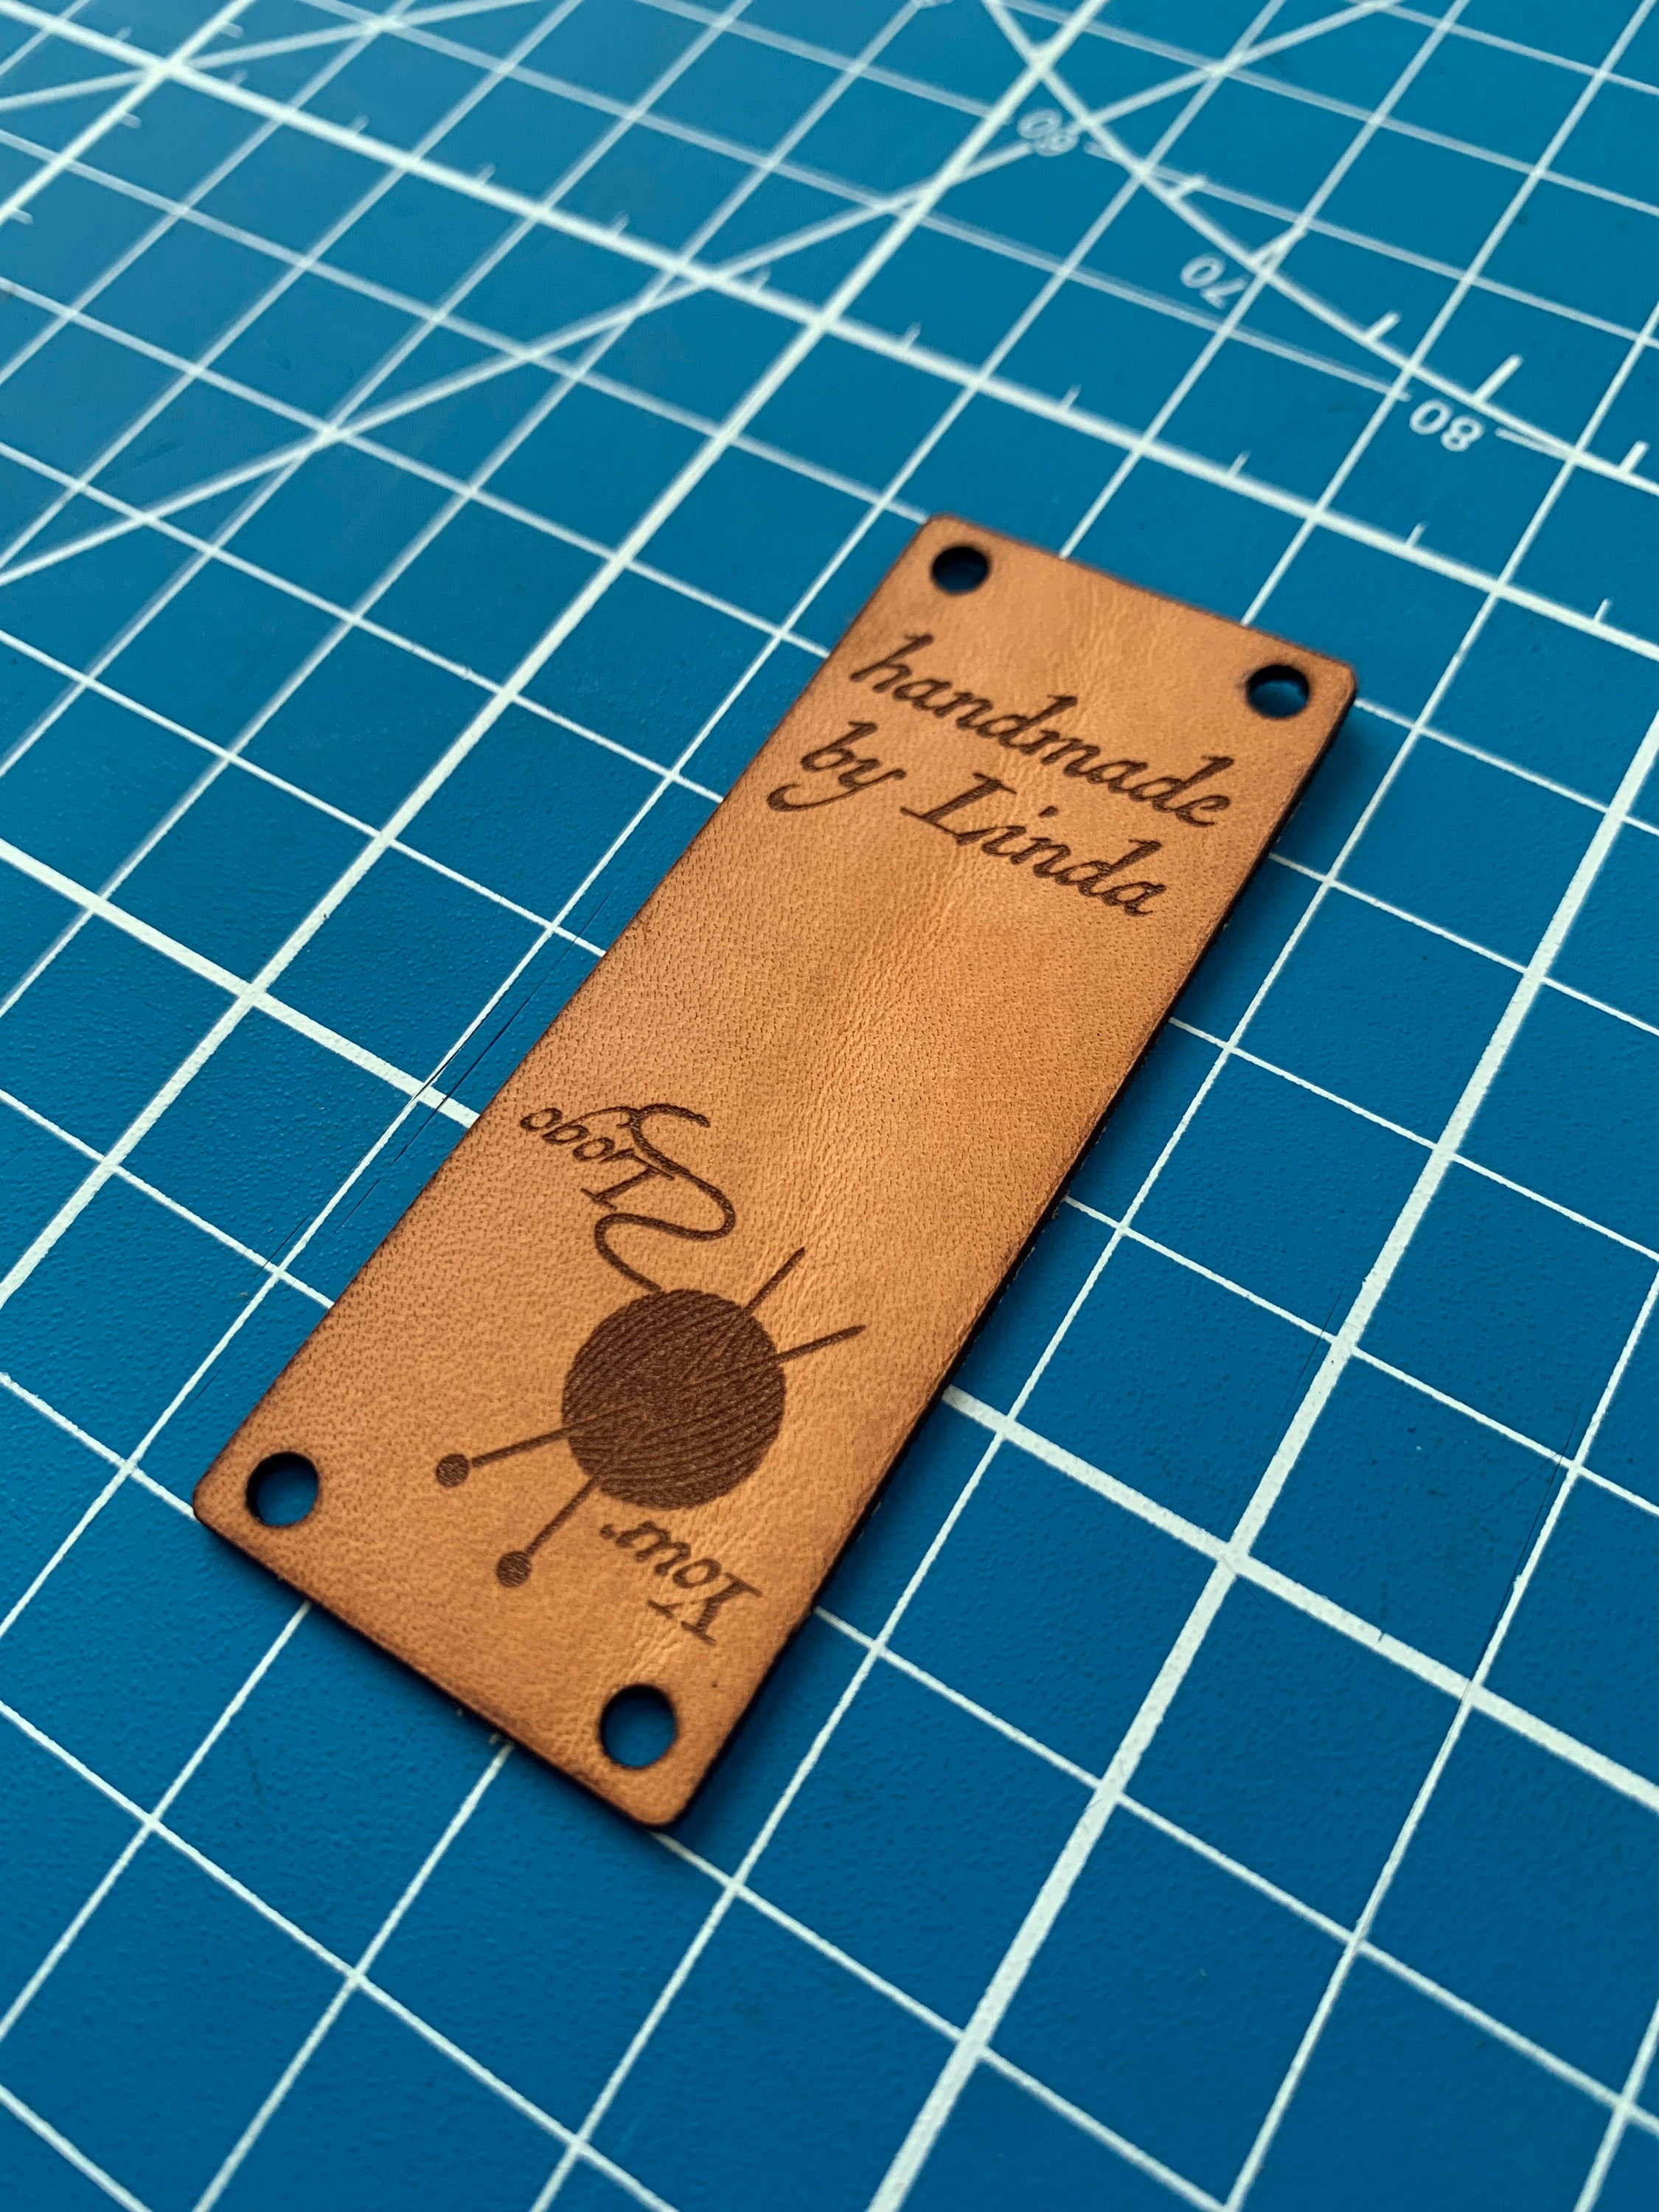 Faux Leather Tags for Handmade Items SEW ON Personalized Logo